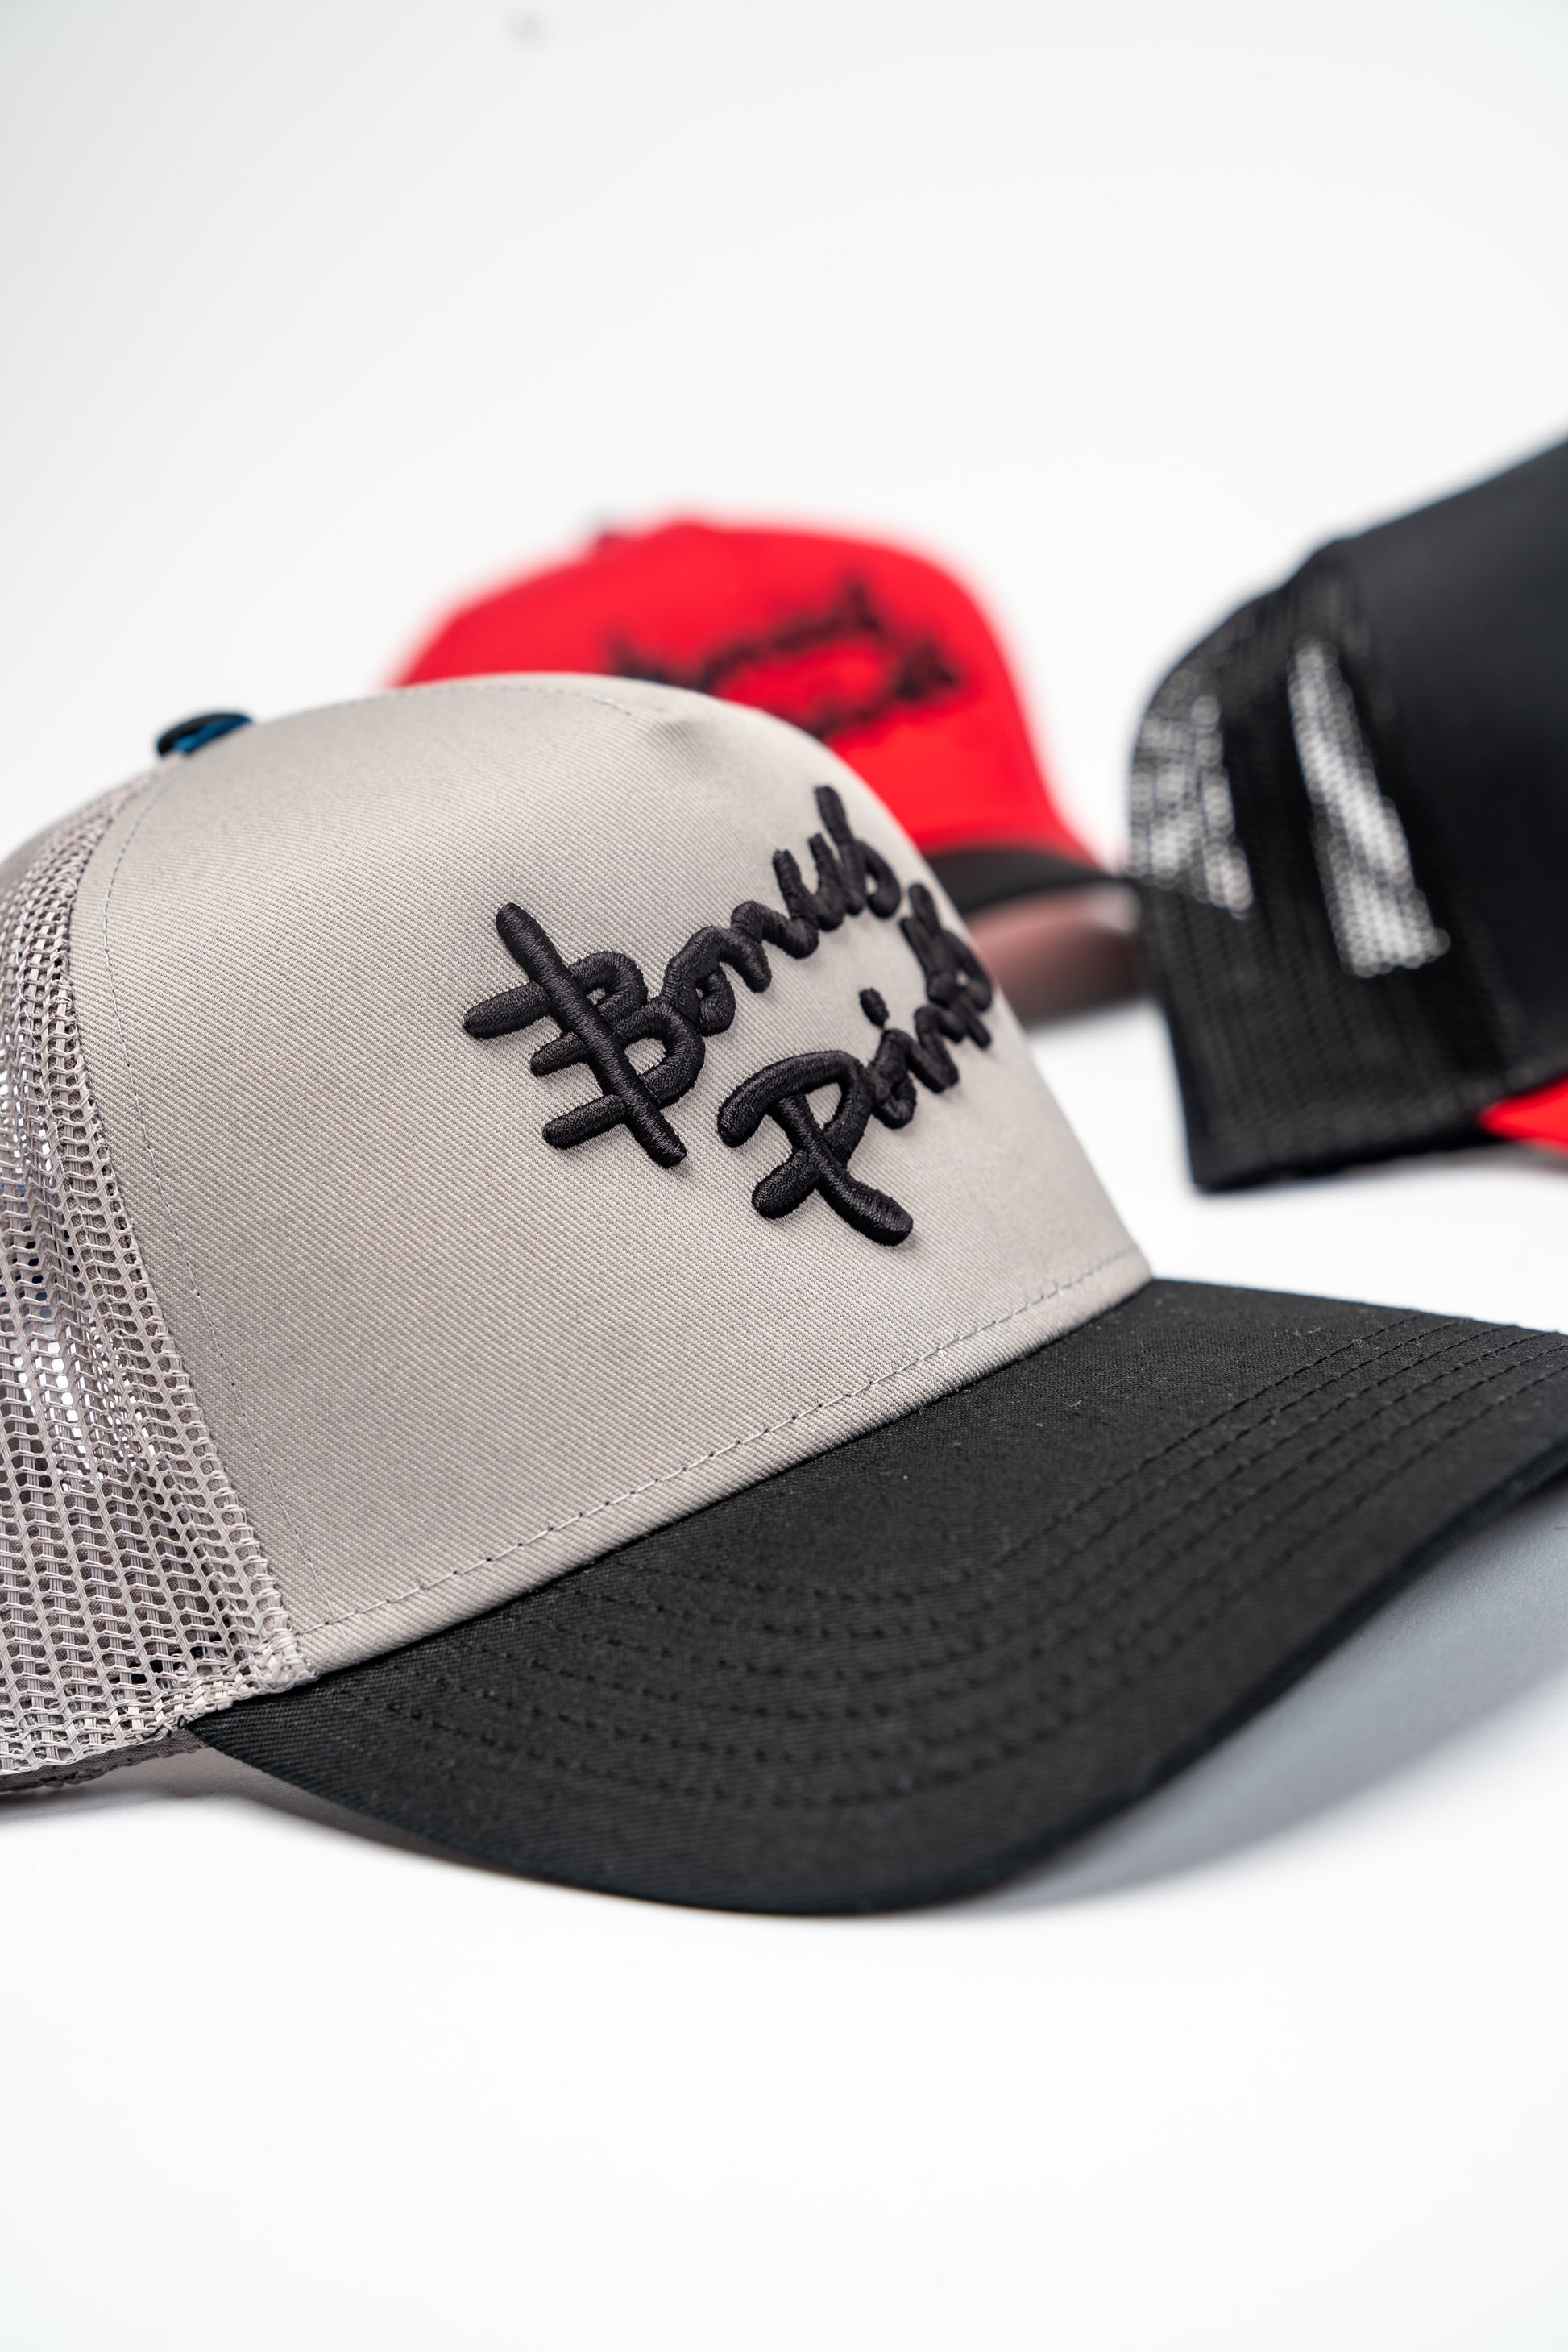 Side Close up Shot of Gray and Black “Extra Credit” Trucker Hat amongst a few other trucker hats  in the background 